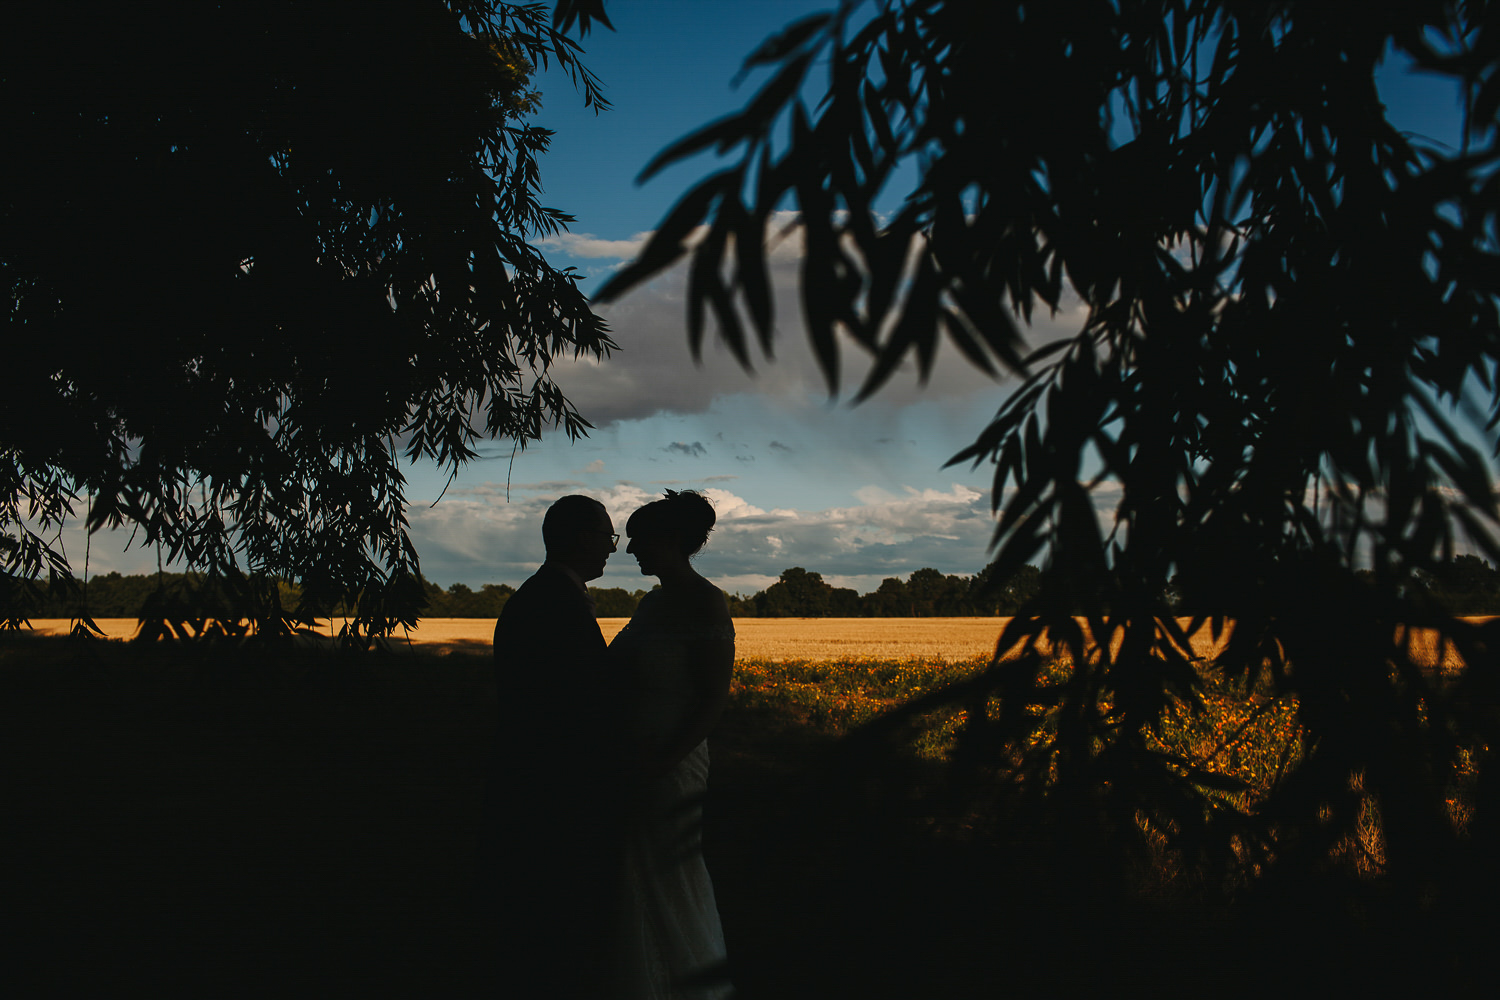 Bride and groom silouette picture in front of golden fields and blue sky